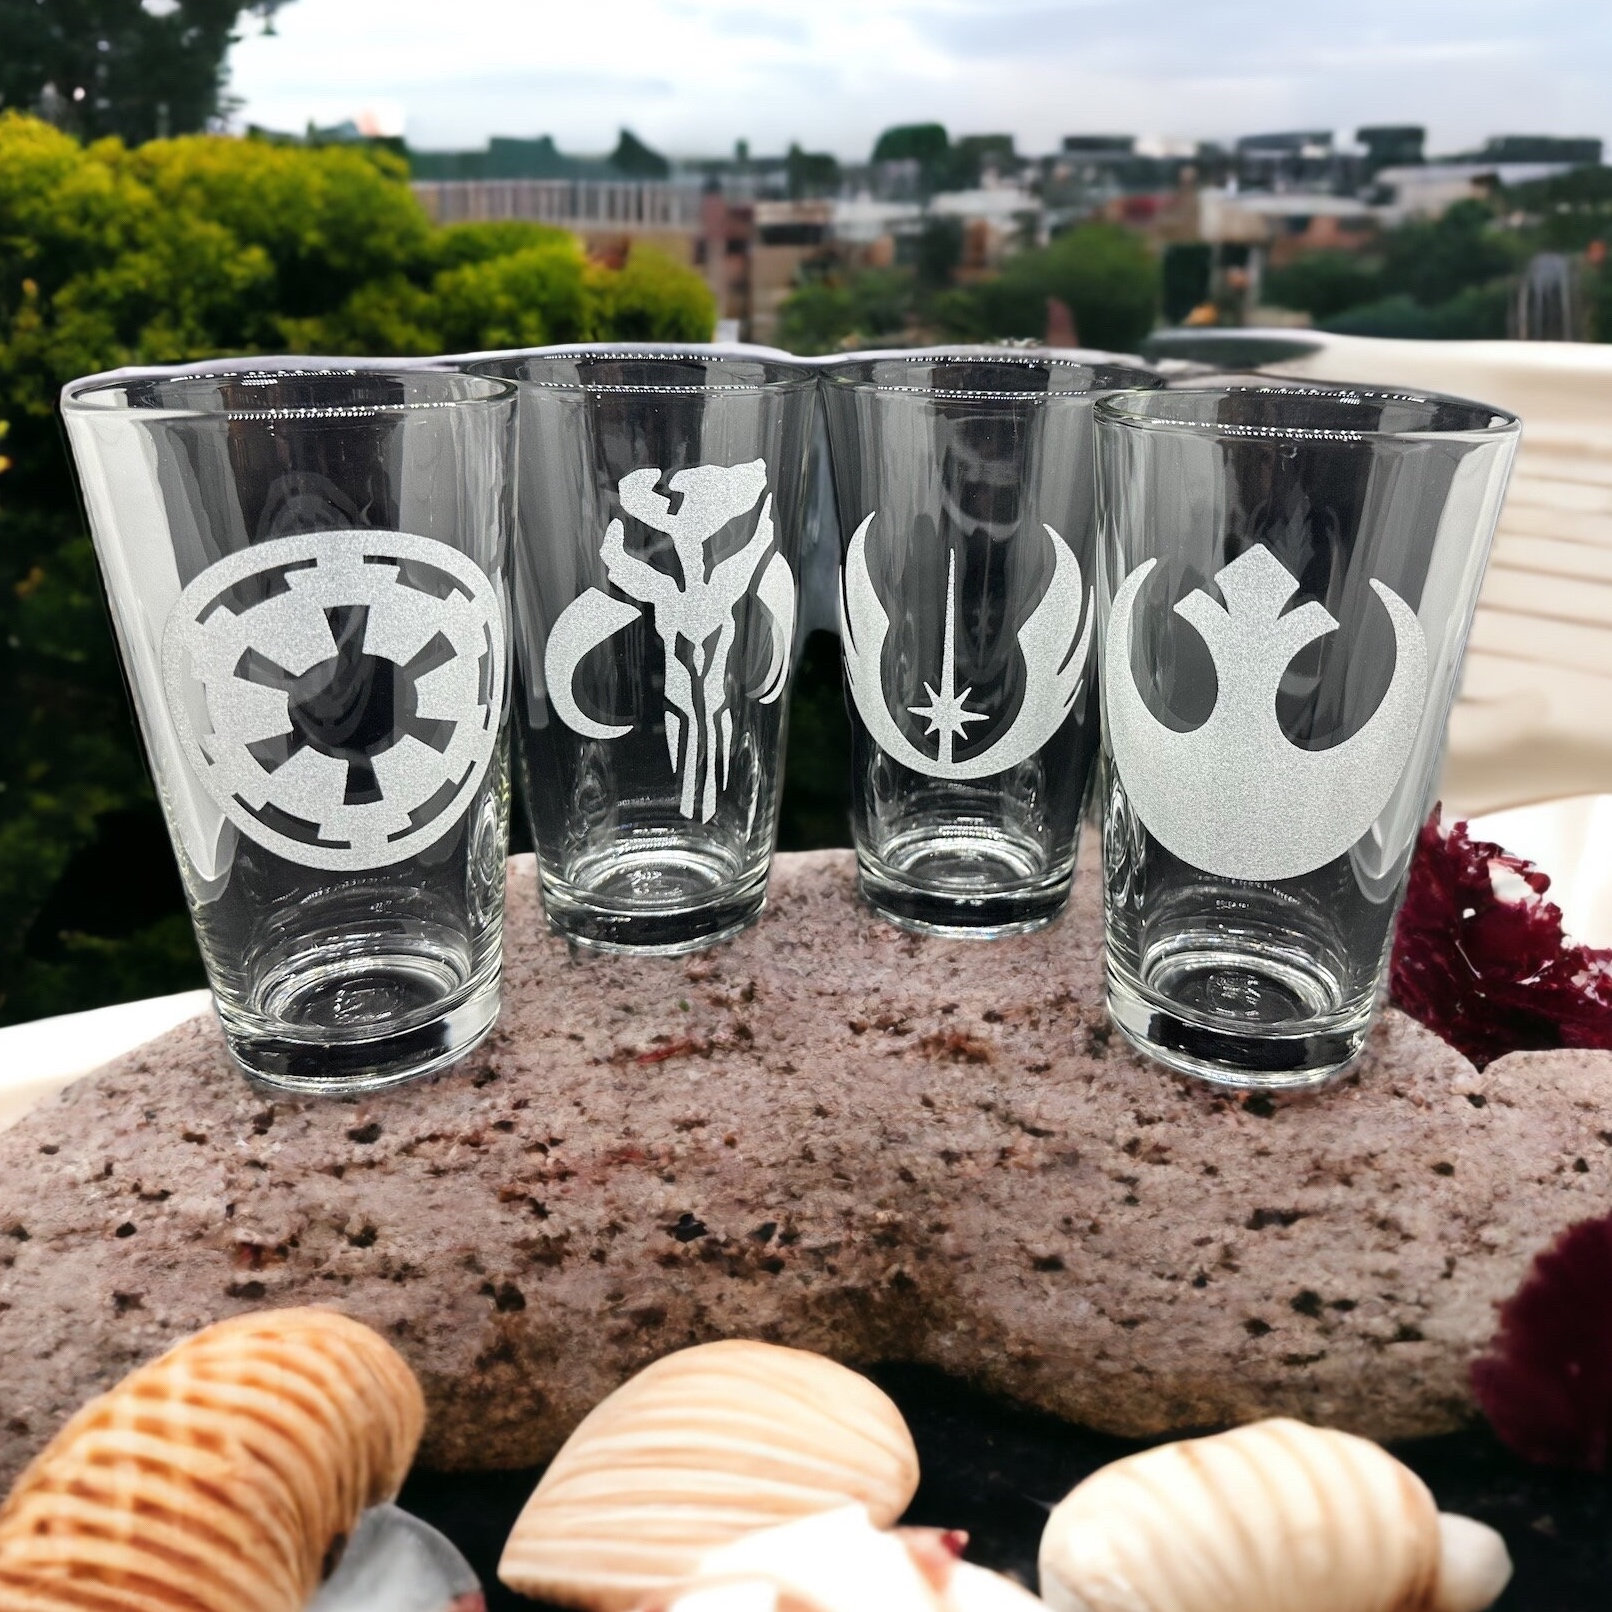 Star Wars The Force Awakens Photo Images 10 ounce Pint Glass Set